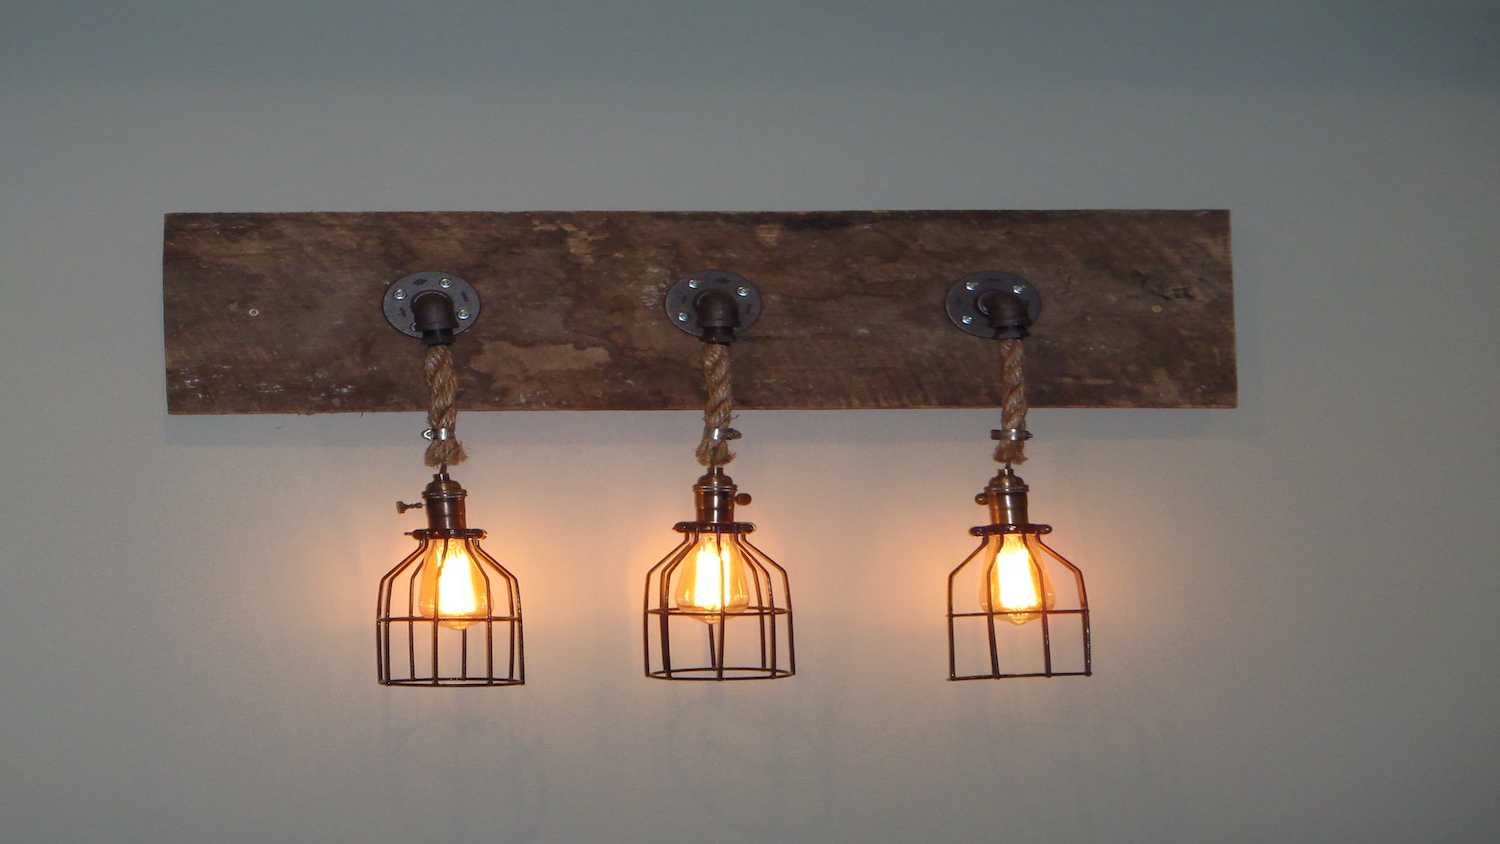 A wall light made using Michigan Reclaimed Barns and Lumber wood